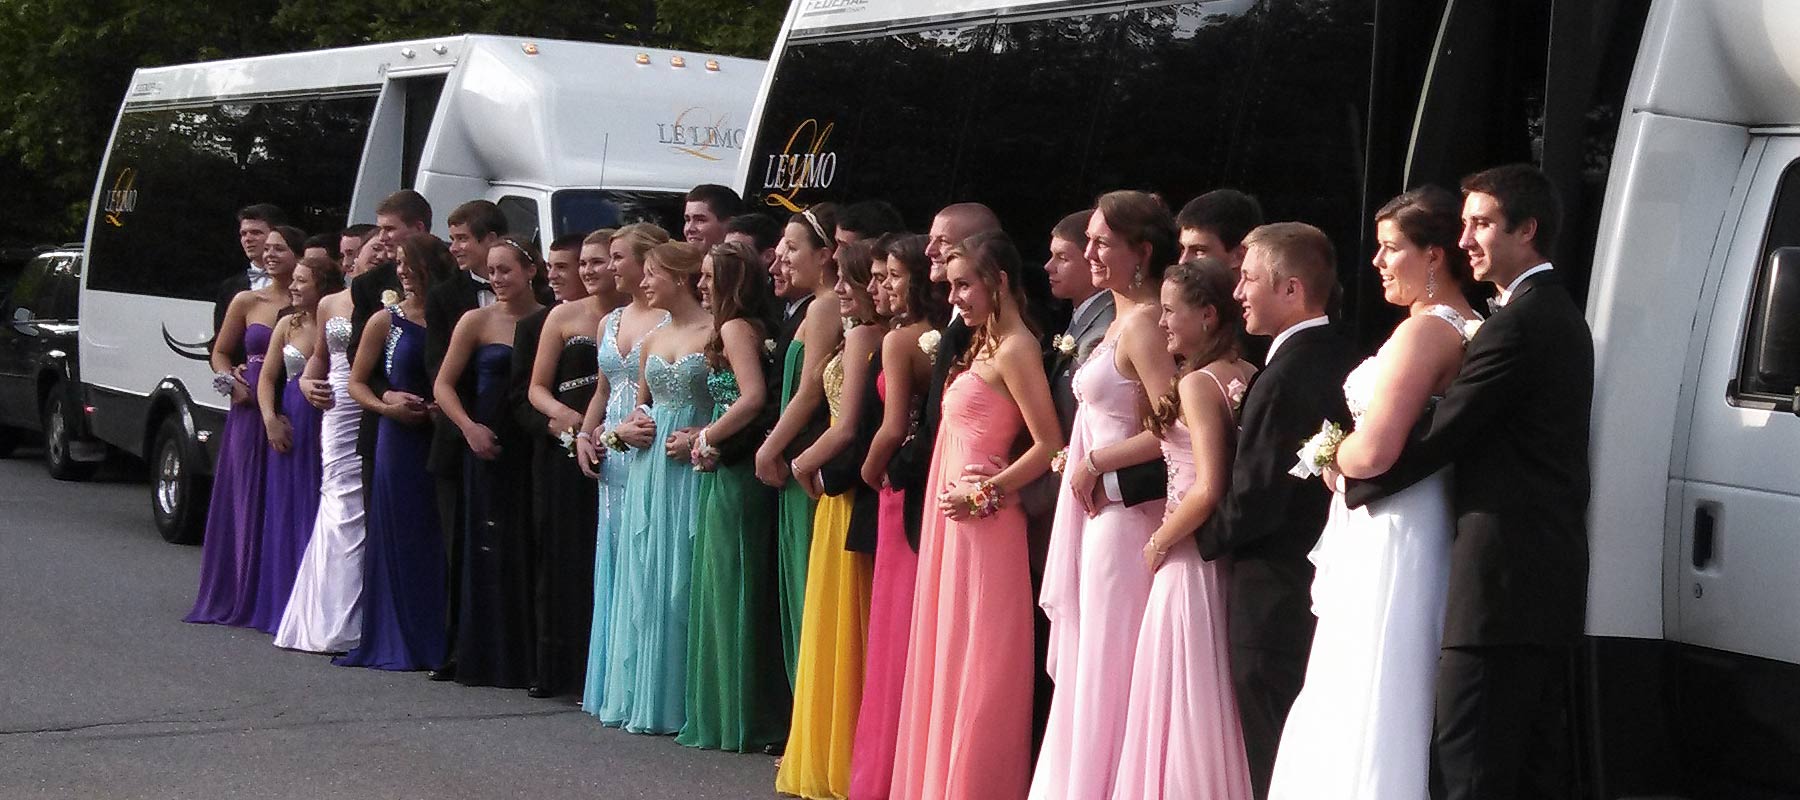 Prom Night with Le limo Party Buses